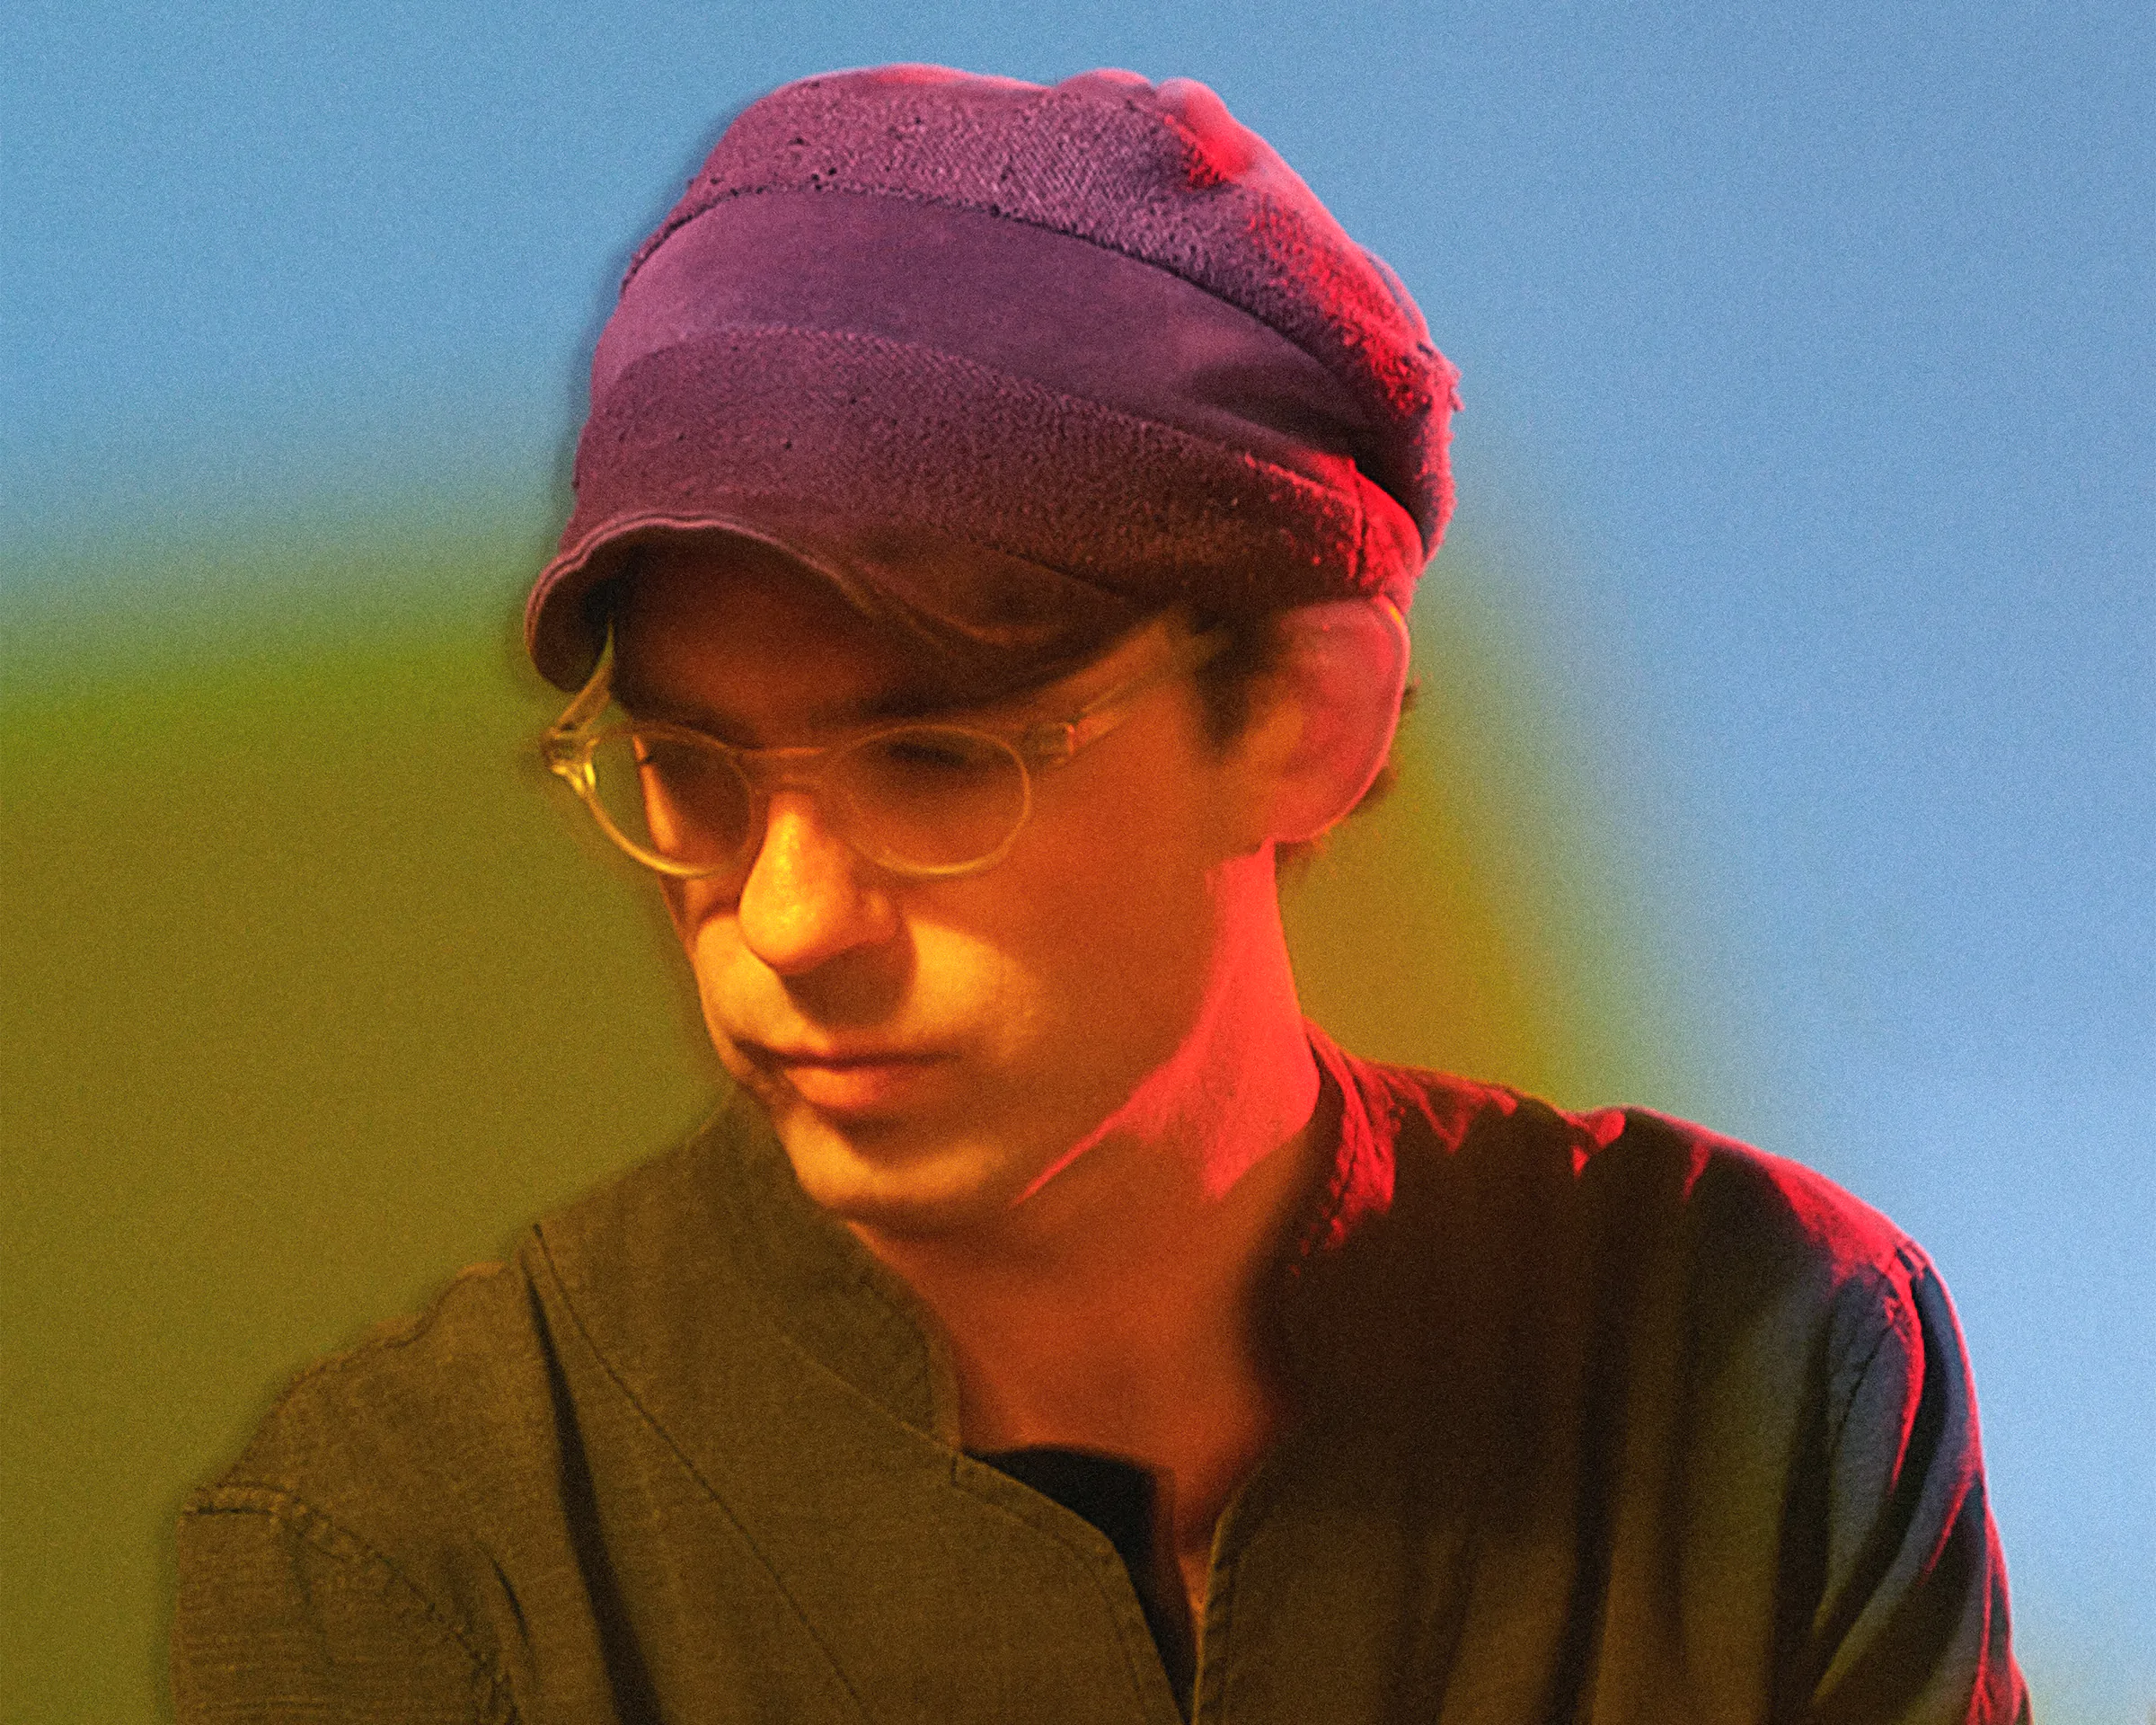 CLAP YOUR HANDS SAY YEAH shares new single ‘CYHSY, 2005’ from forthcoming album ‘New Fragility’